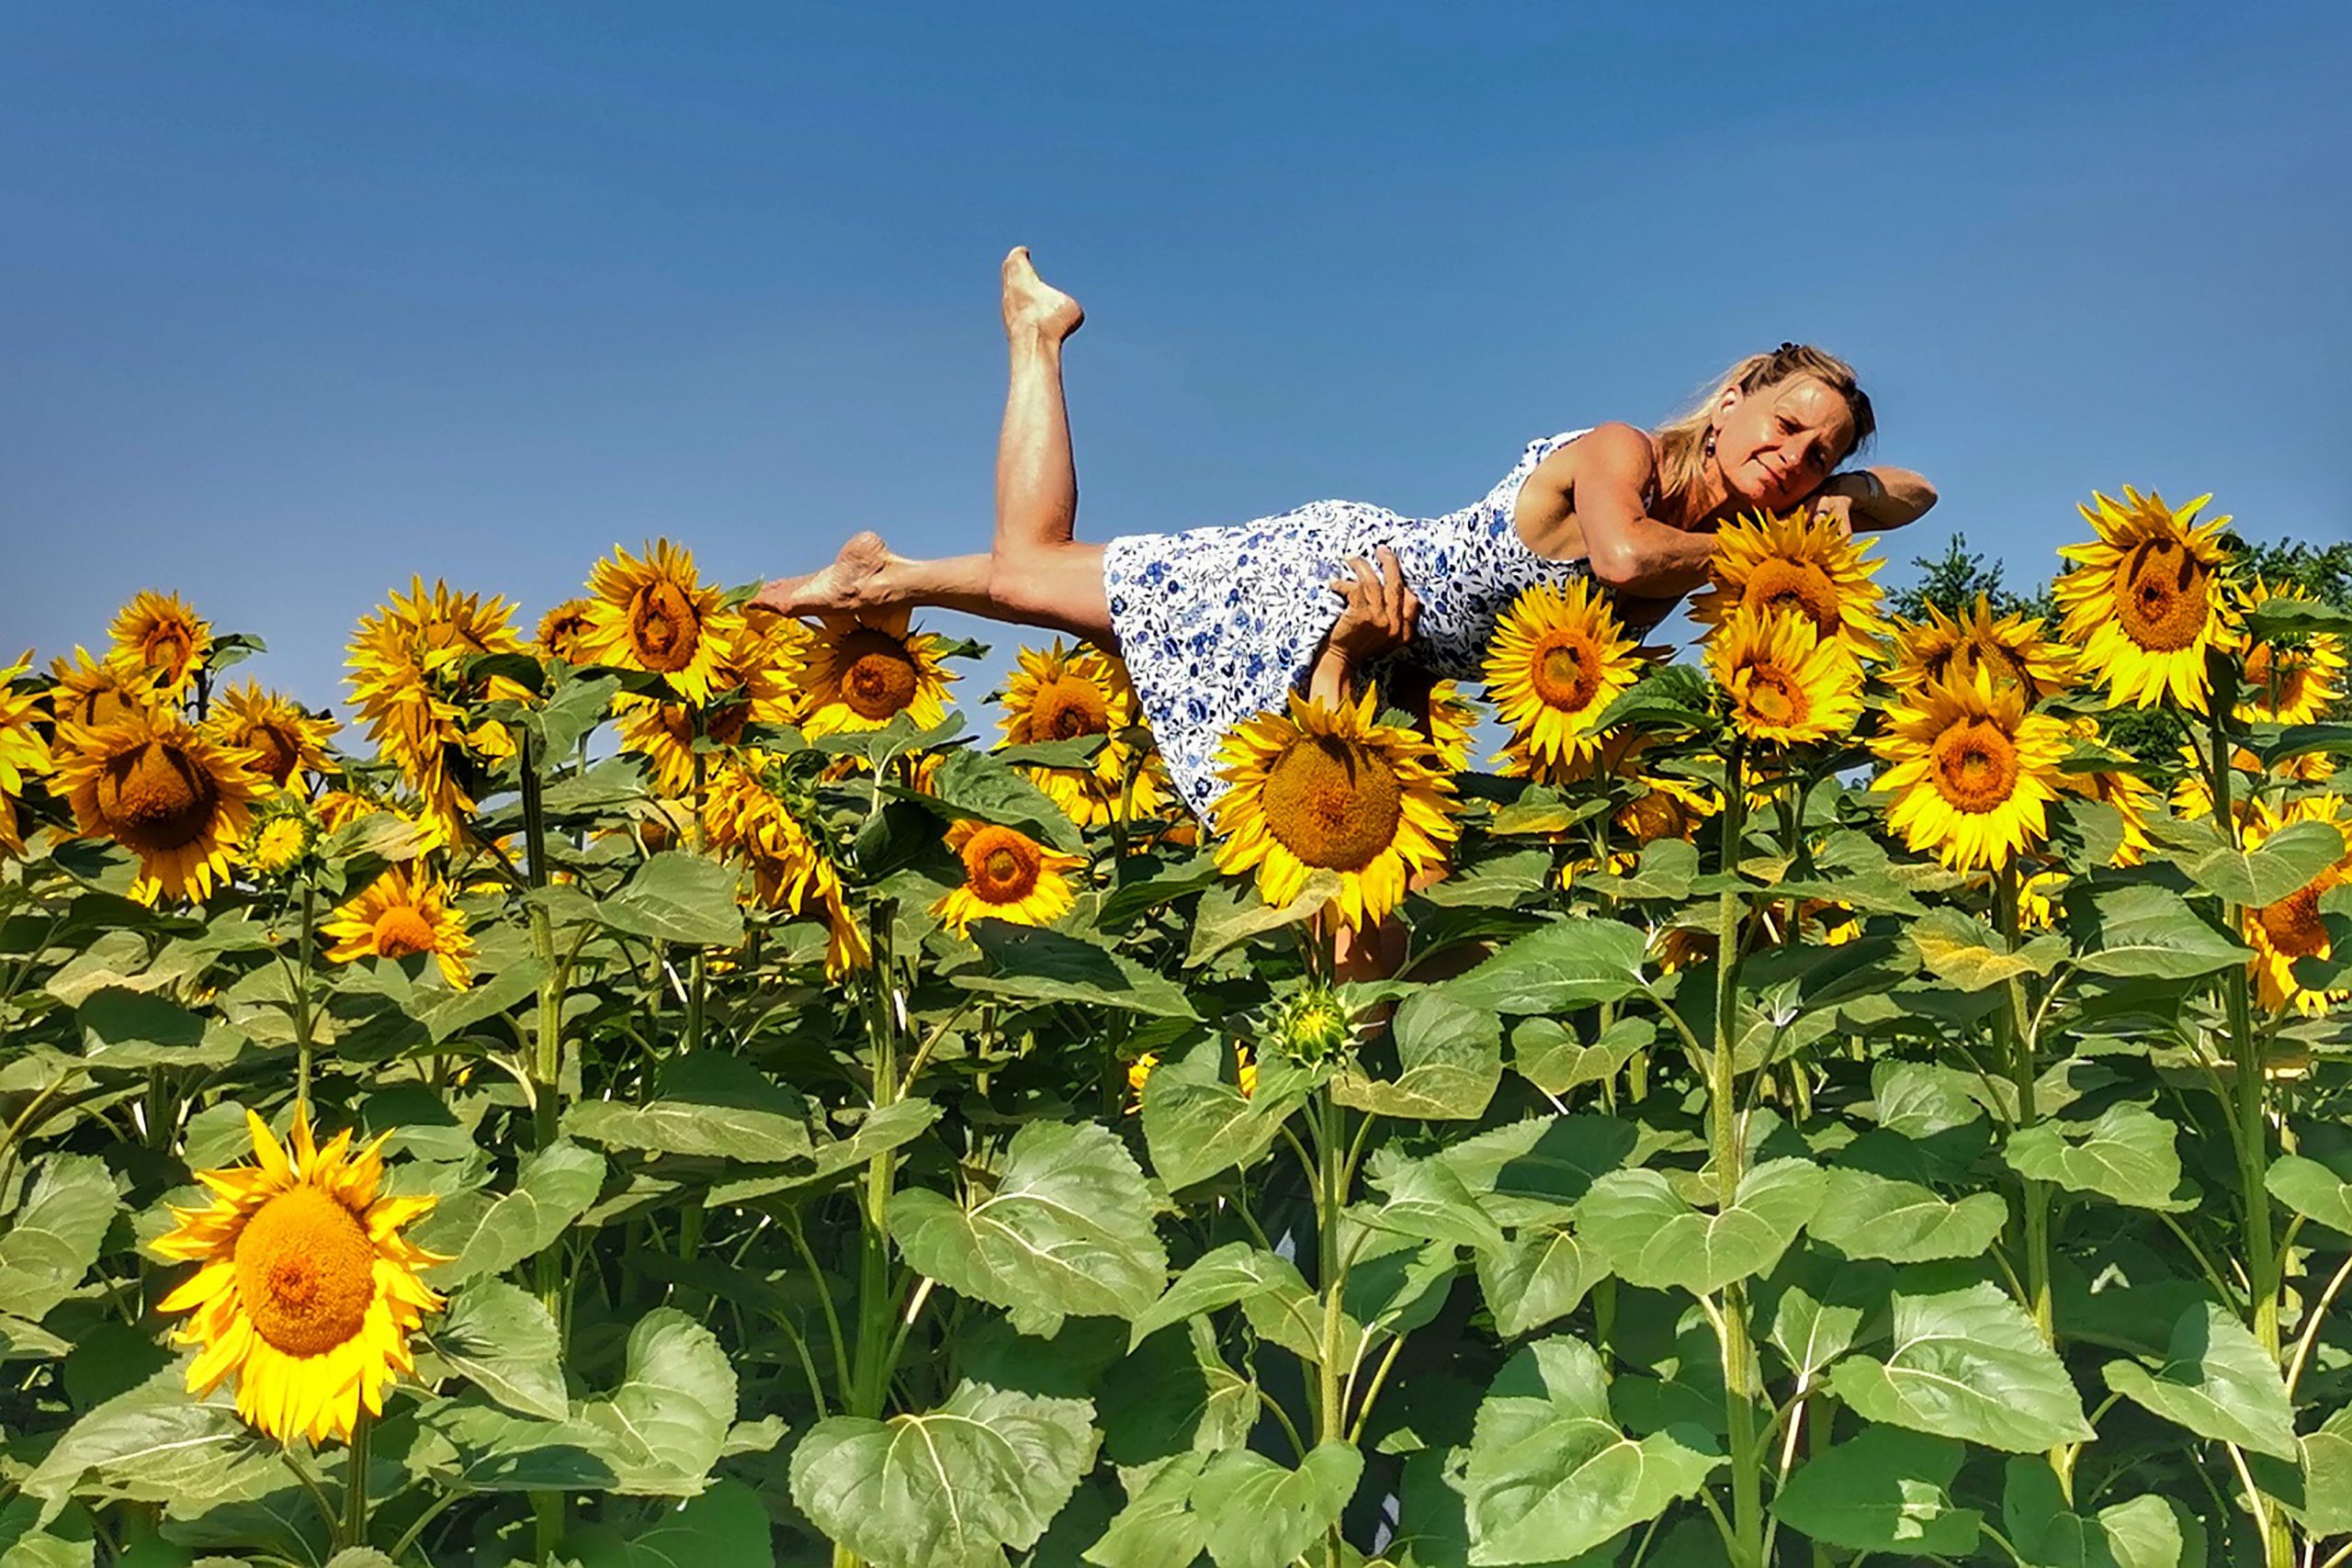 Bed of sunflowers